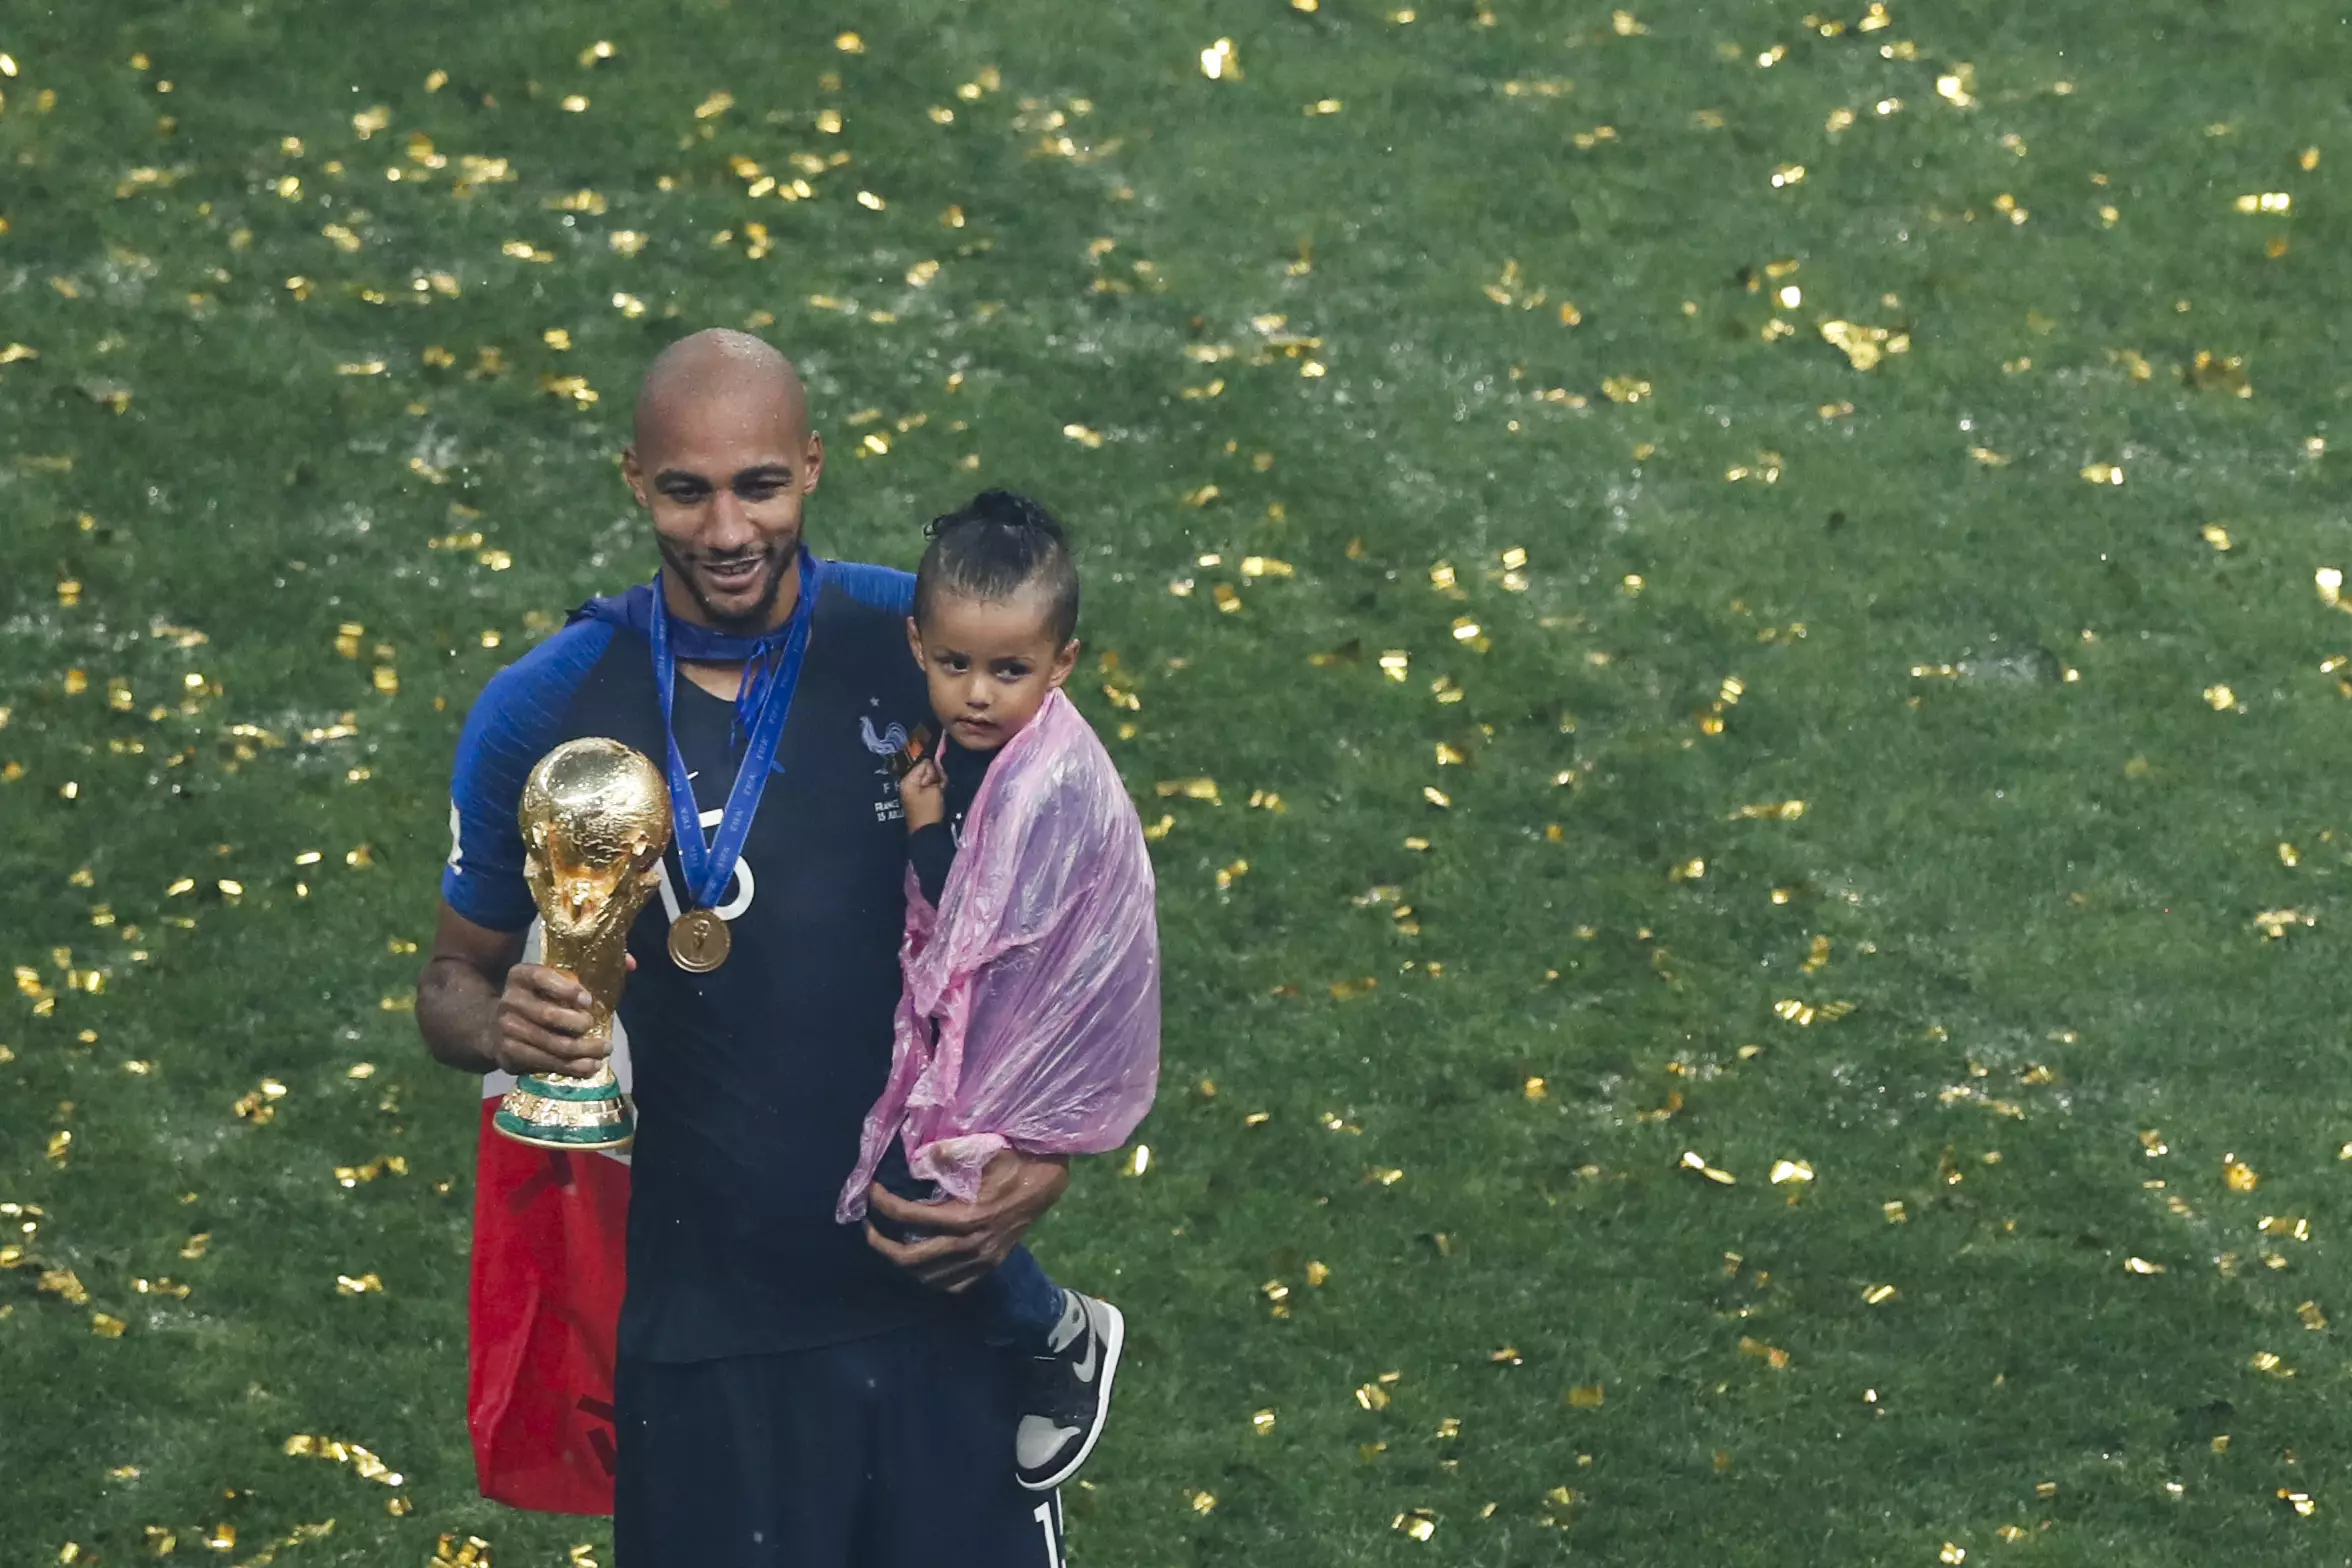 Nzonzi was part of France's World Cup winning team. Image: PA Images